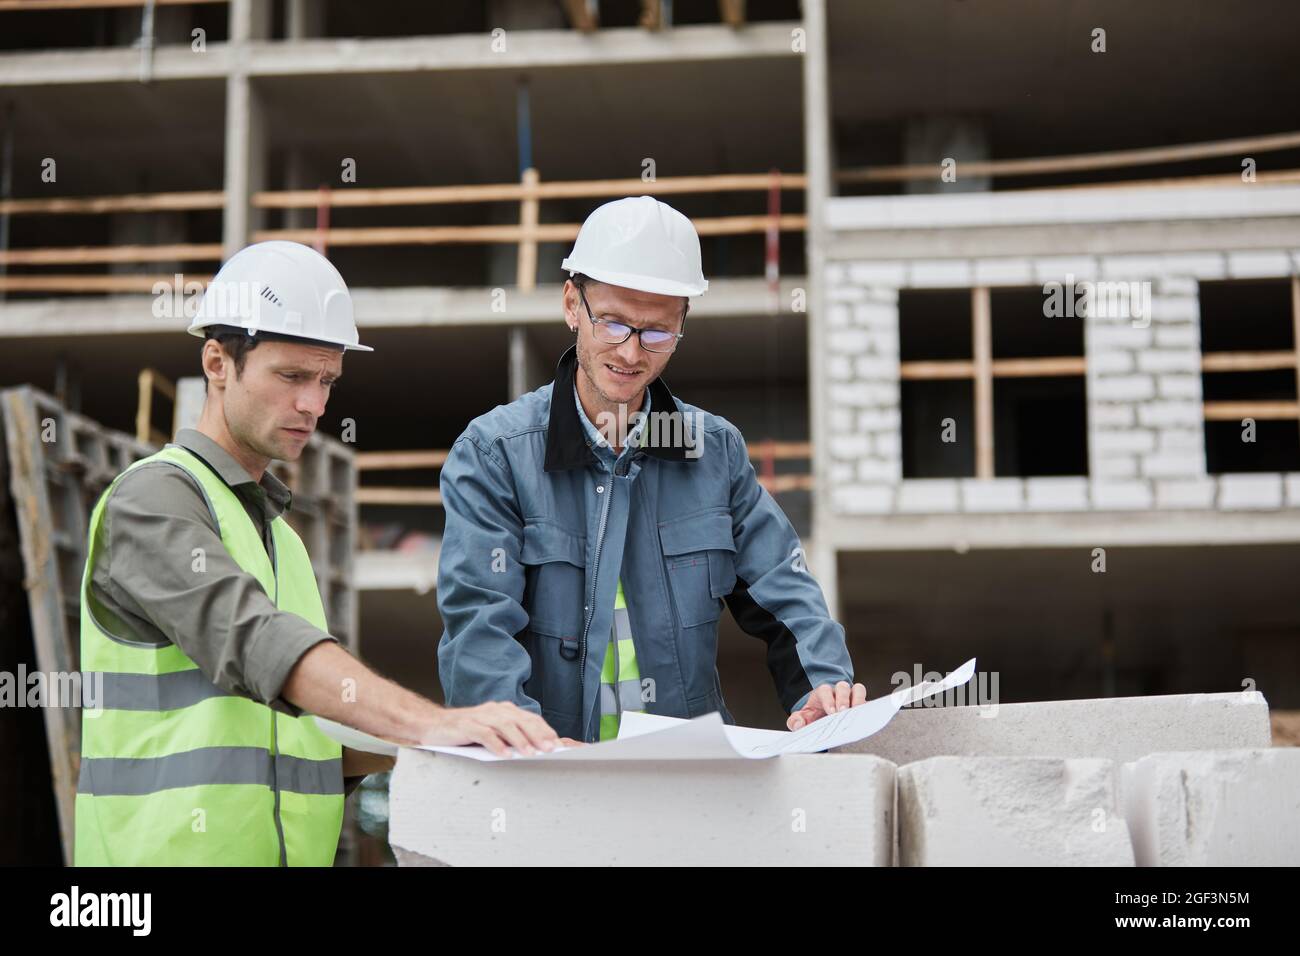 Waist up portrait of two workers discussing floor plans at construction site, copy space Stock Photo